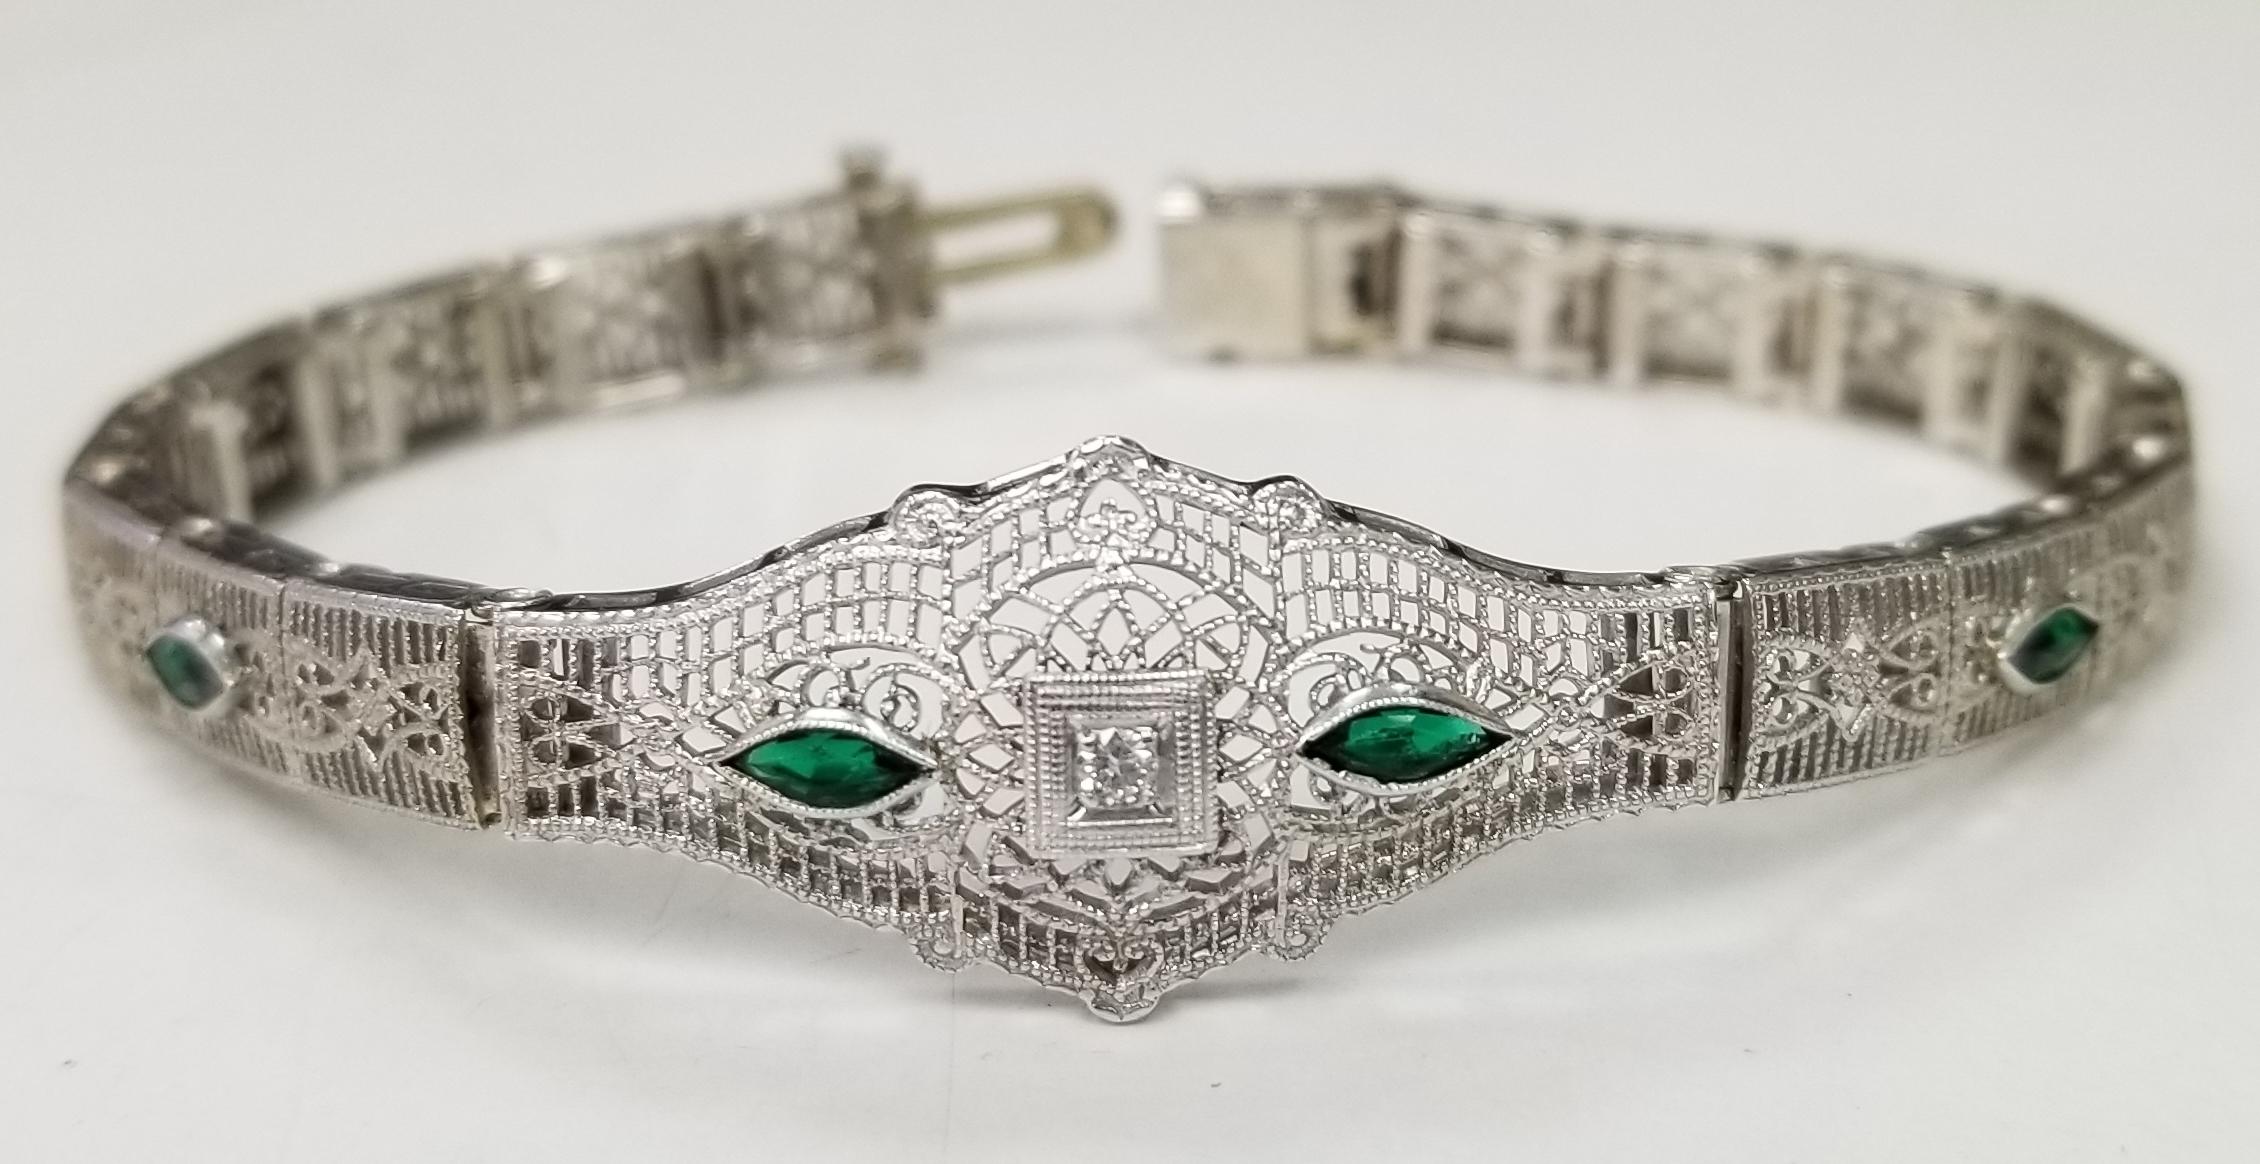 Beautiful women's Art Deco filigree bracelet in 14k white gold. This bracelet features round brilliant cut diamonds and  marquise emeralds.  The bracelet has a solid clasp and safety. 
Specifications:
    main stone: ROUND CUT 
    additional: